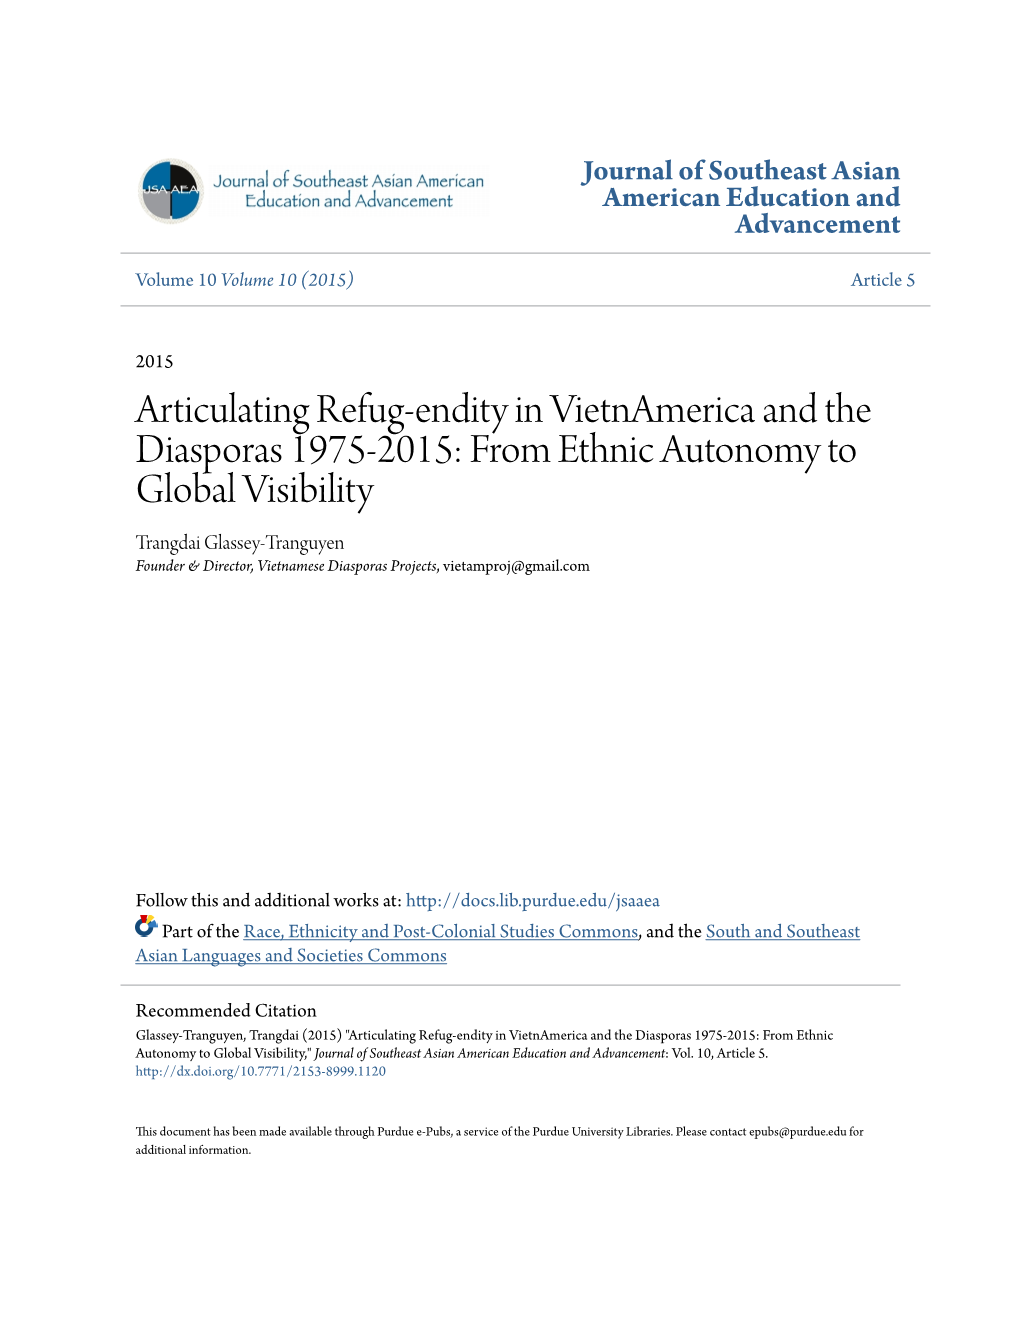 Articulating Refug-Endity in Vietnamerica and The